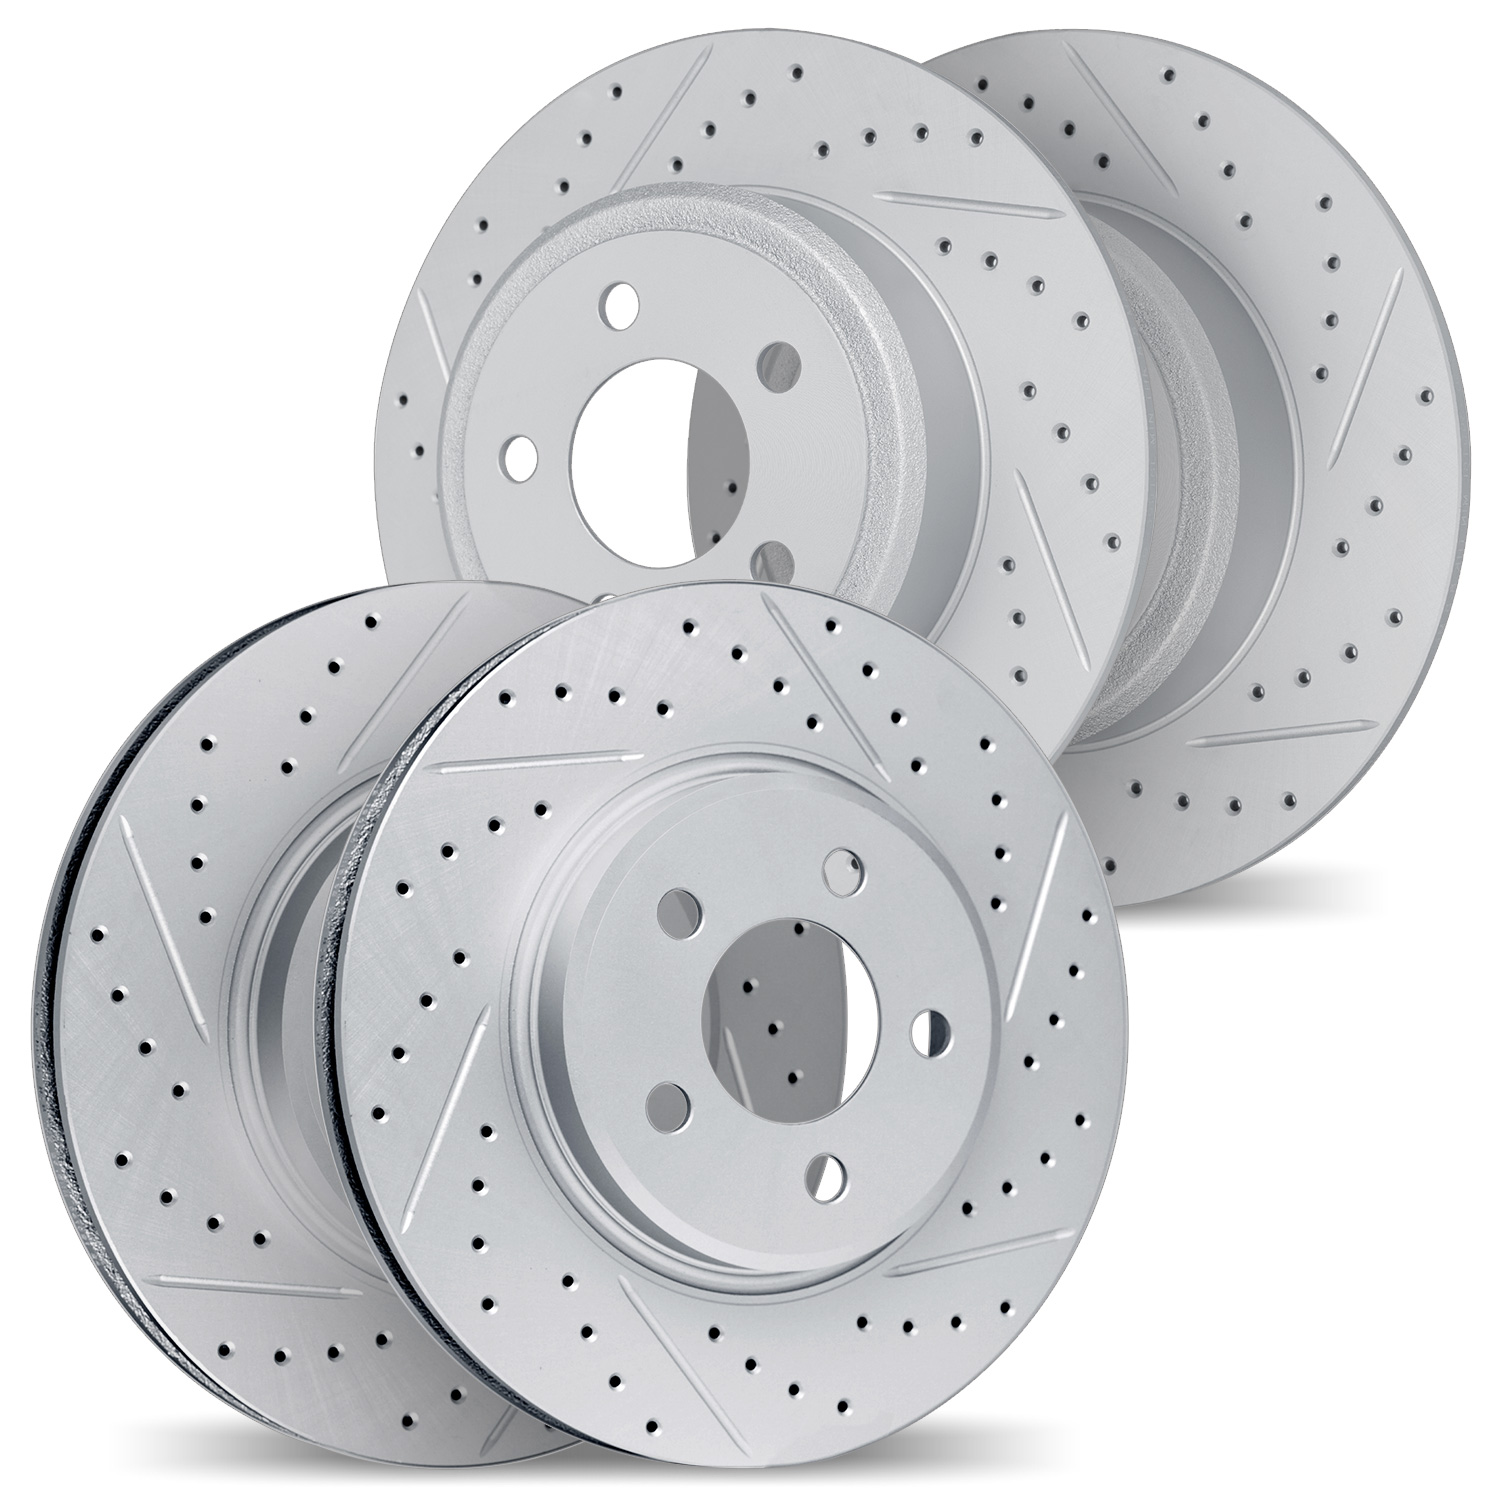 2004-75005 Geoperformance Drilled/Slotted Brake Rotors, 1998-2010 Lexus/Toyota/Scion, Position: Front and Rear